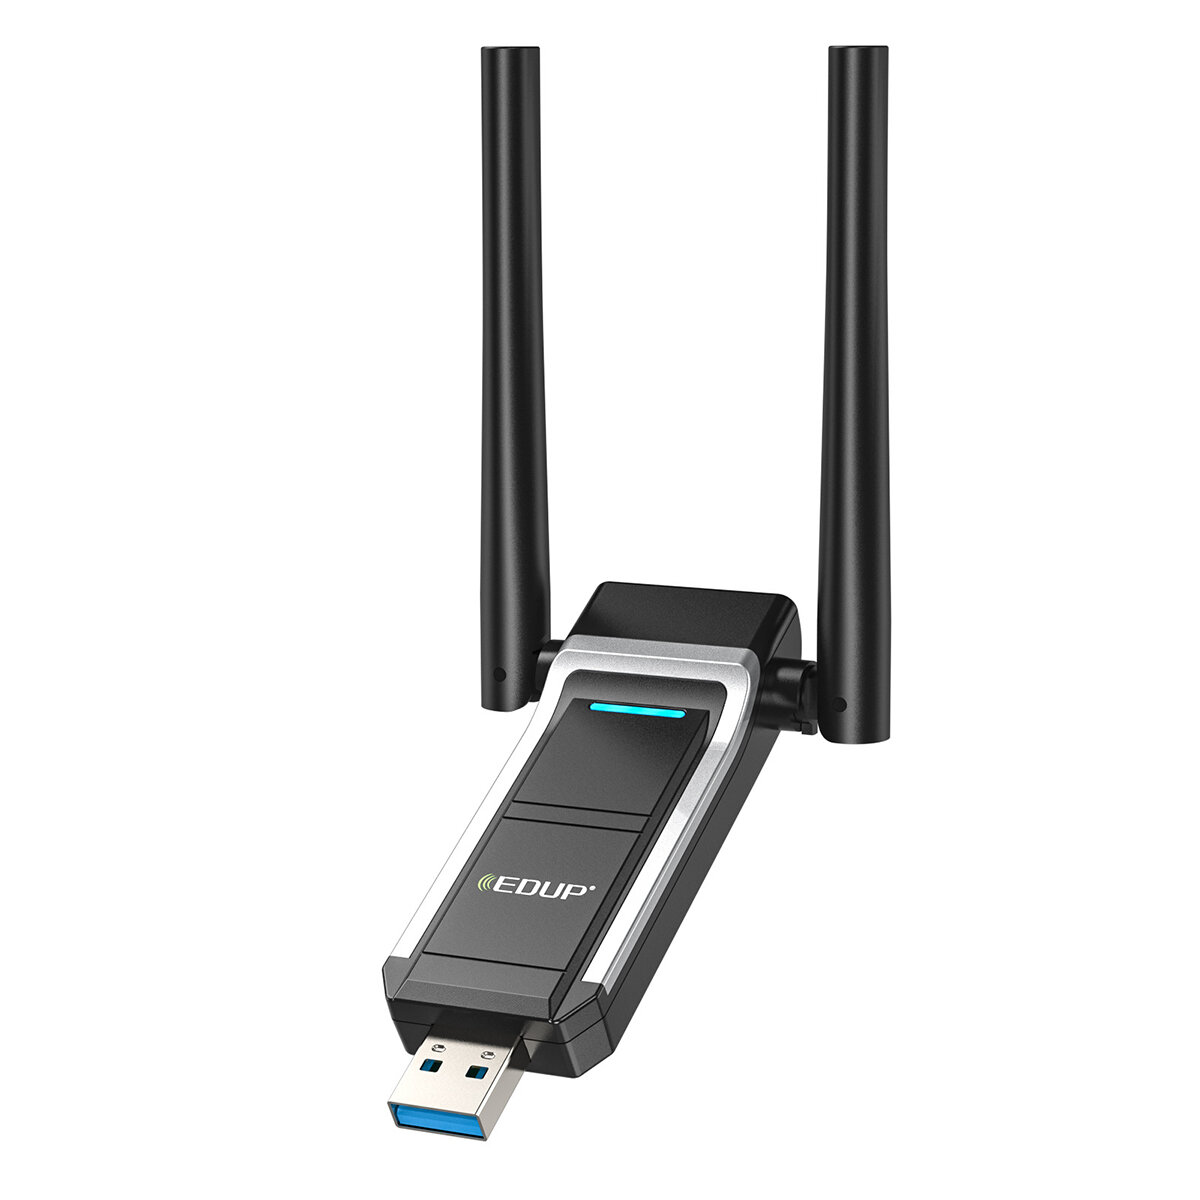 EDUP 1300Mbps USB Wireless WiFi Adapter 2.4/5.8G Dual Band Network Card WiFi Receiver EP-AC1698